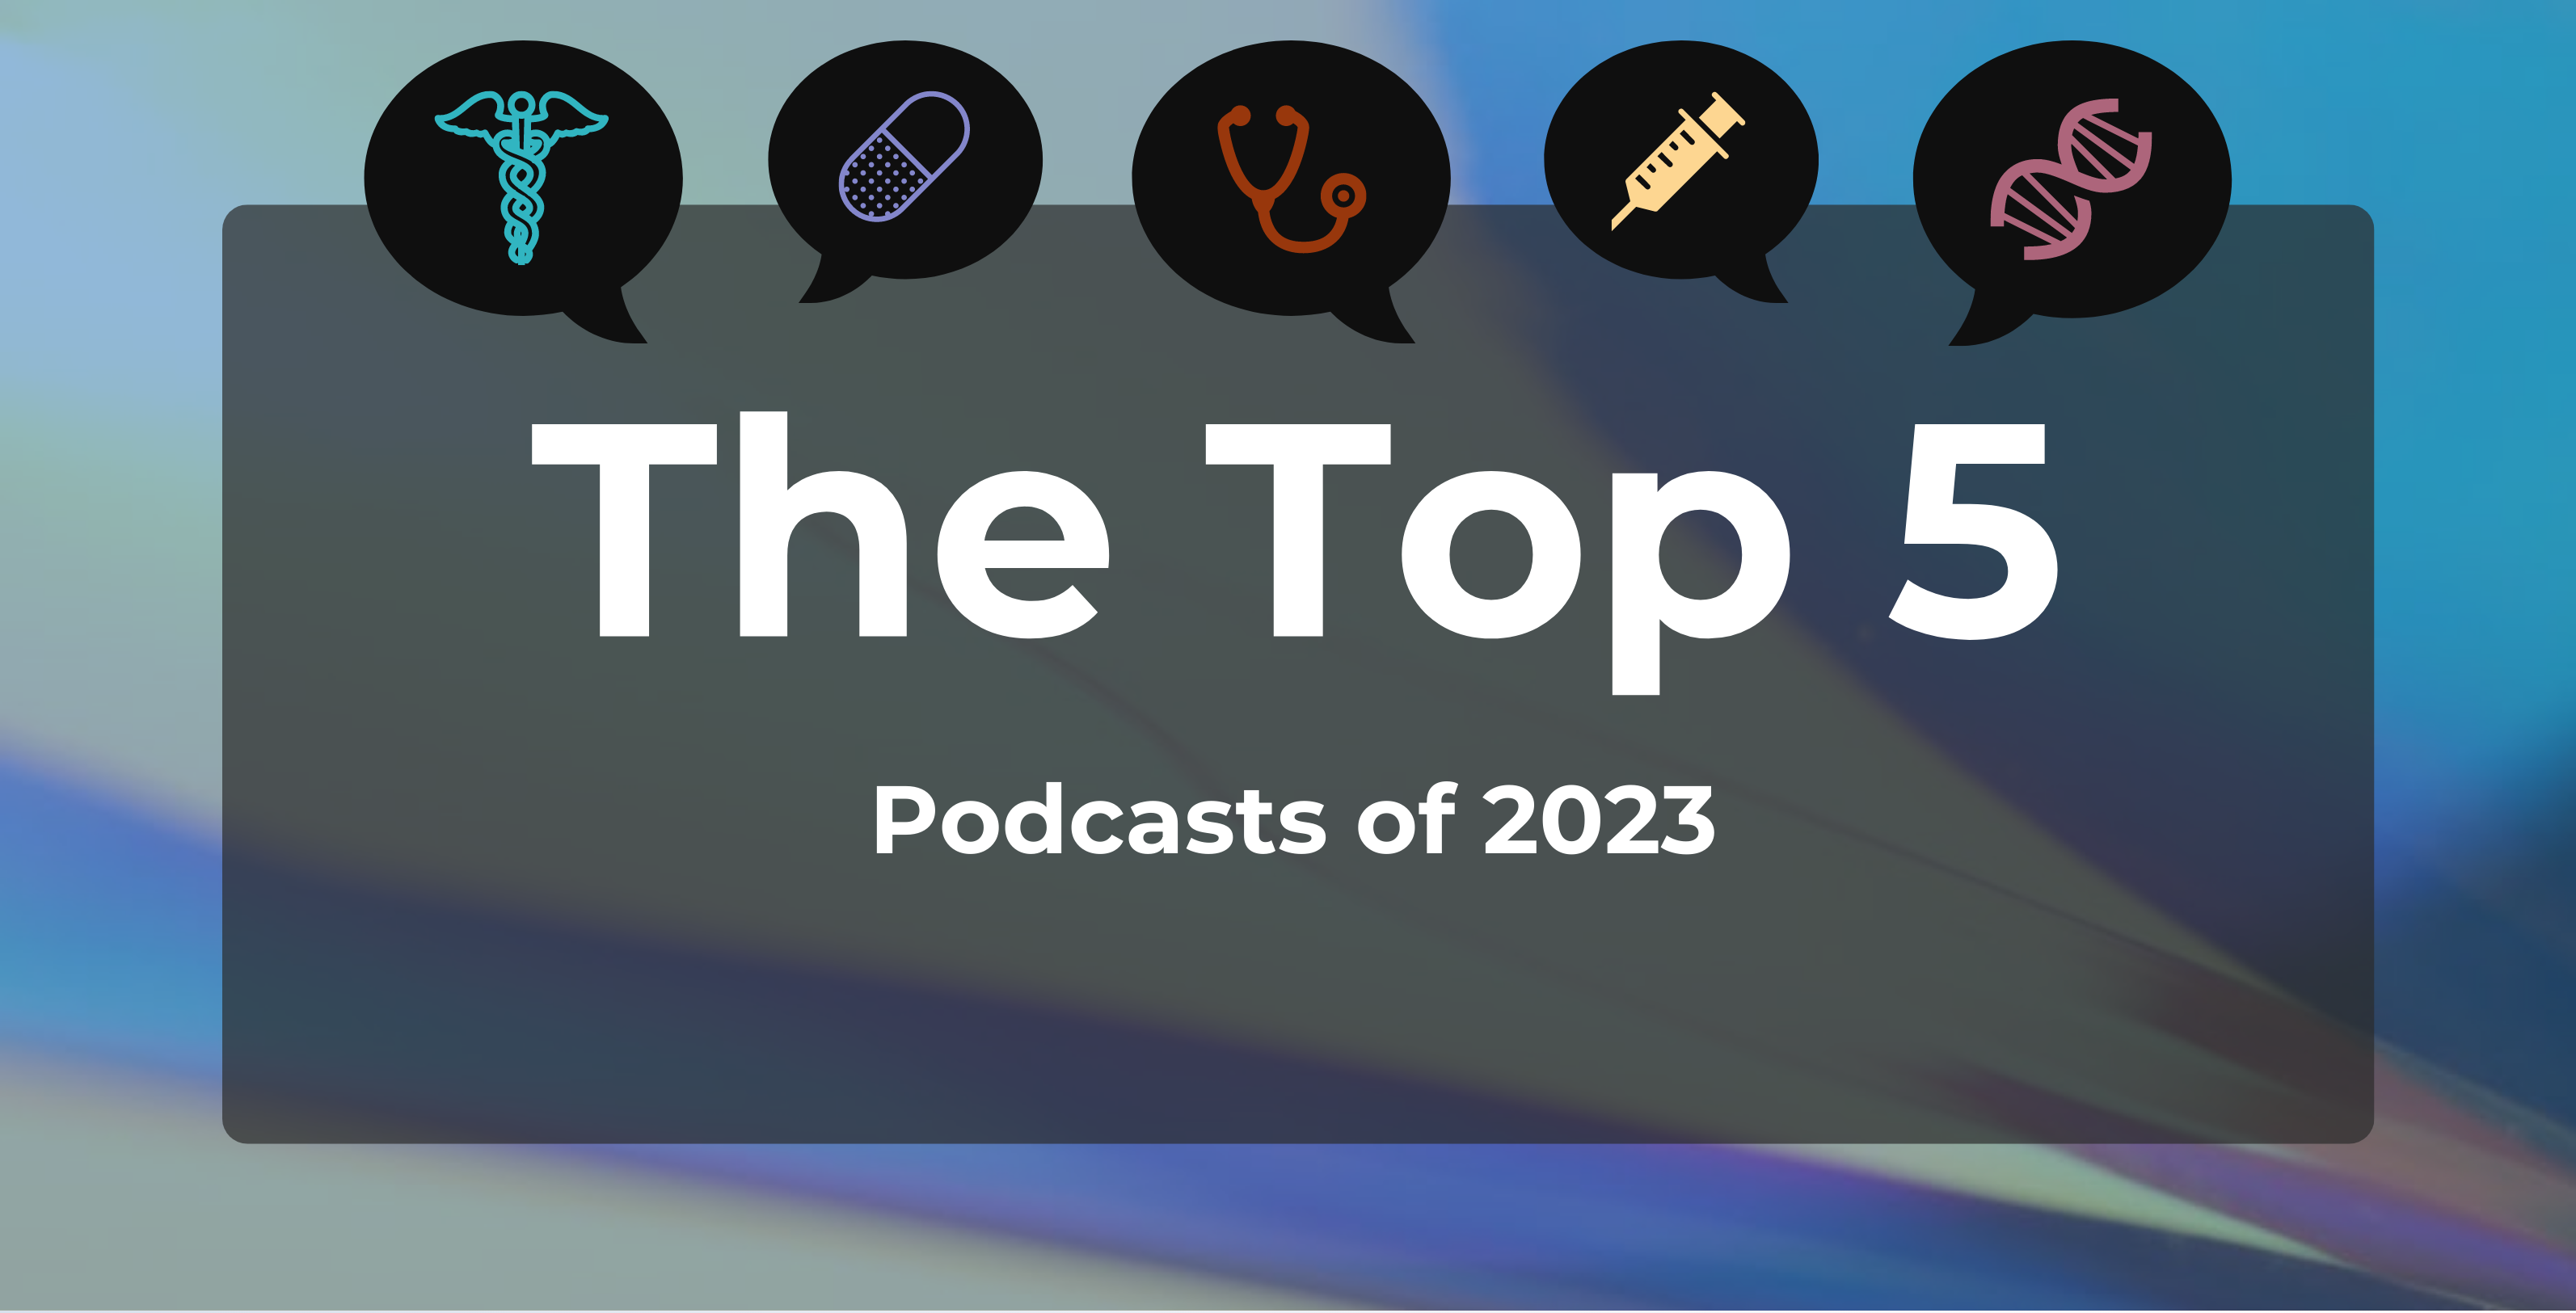 Top 5 Podcasts of 2023